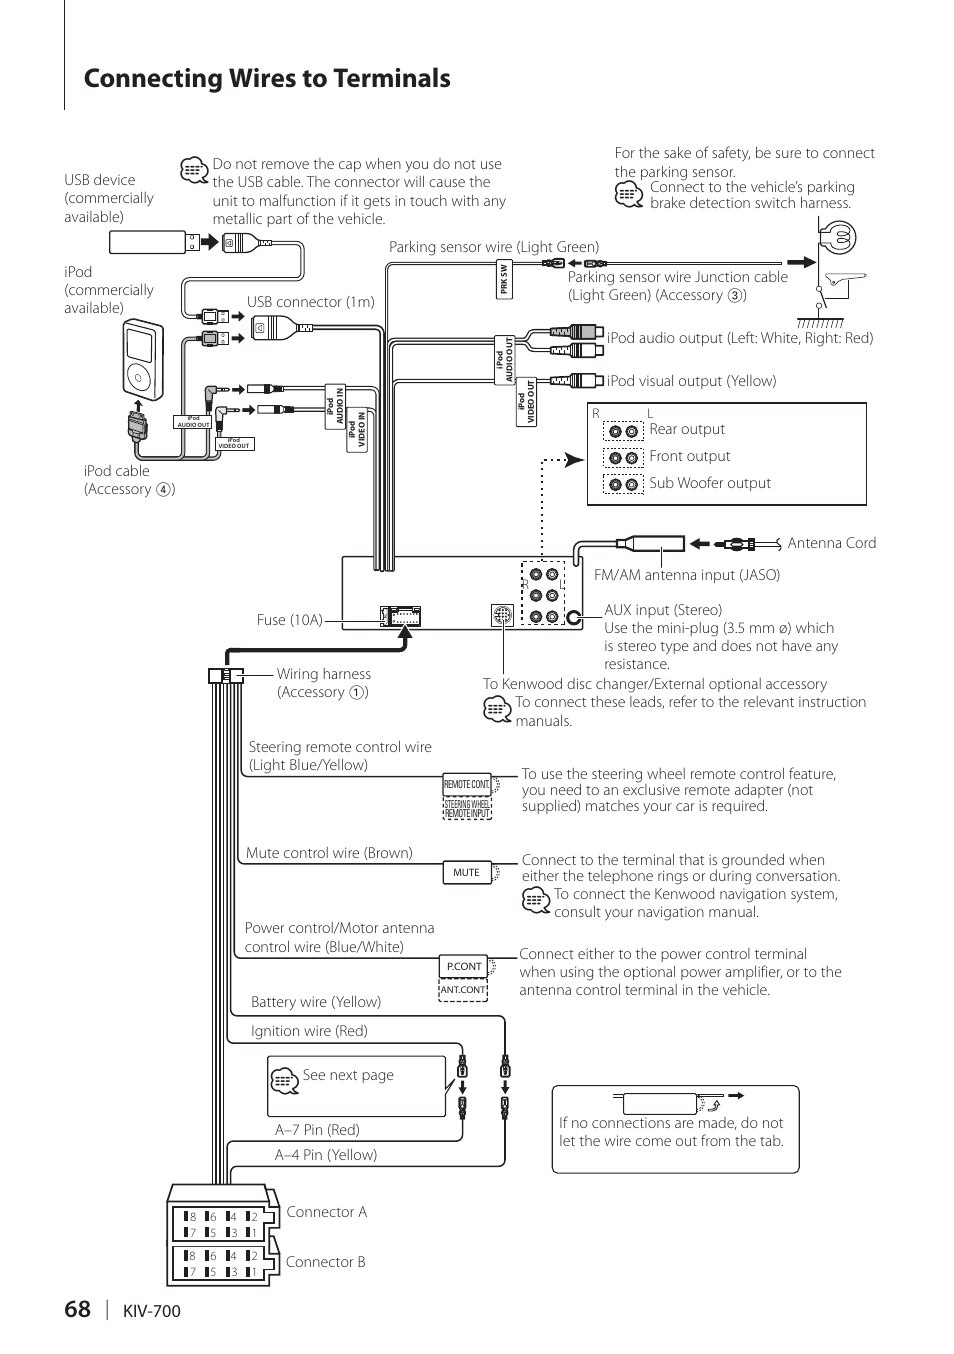 Connecting wires to terminals, Connecting wires to, Terminals | Kenwood KIV- 700 User Manual | Page 68 / 76